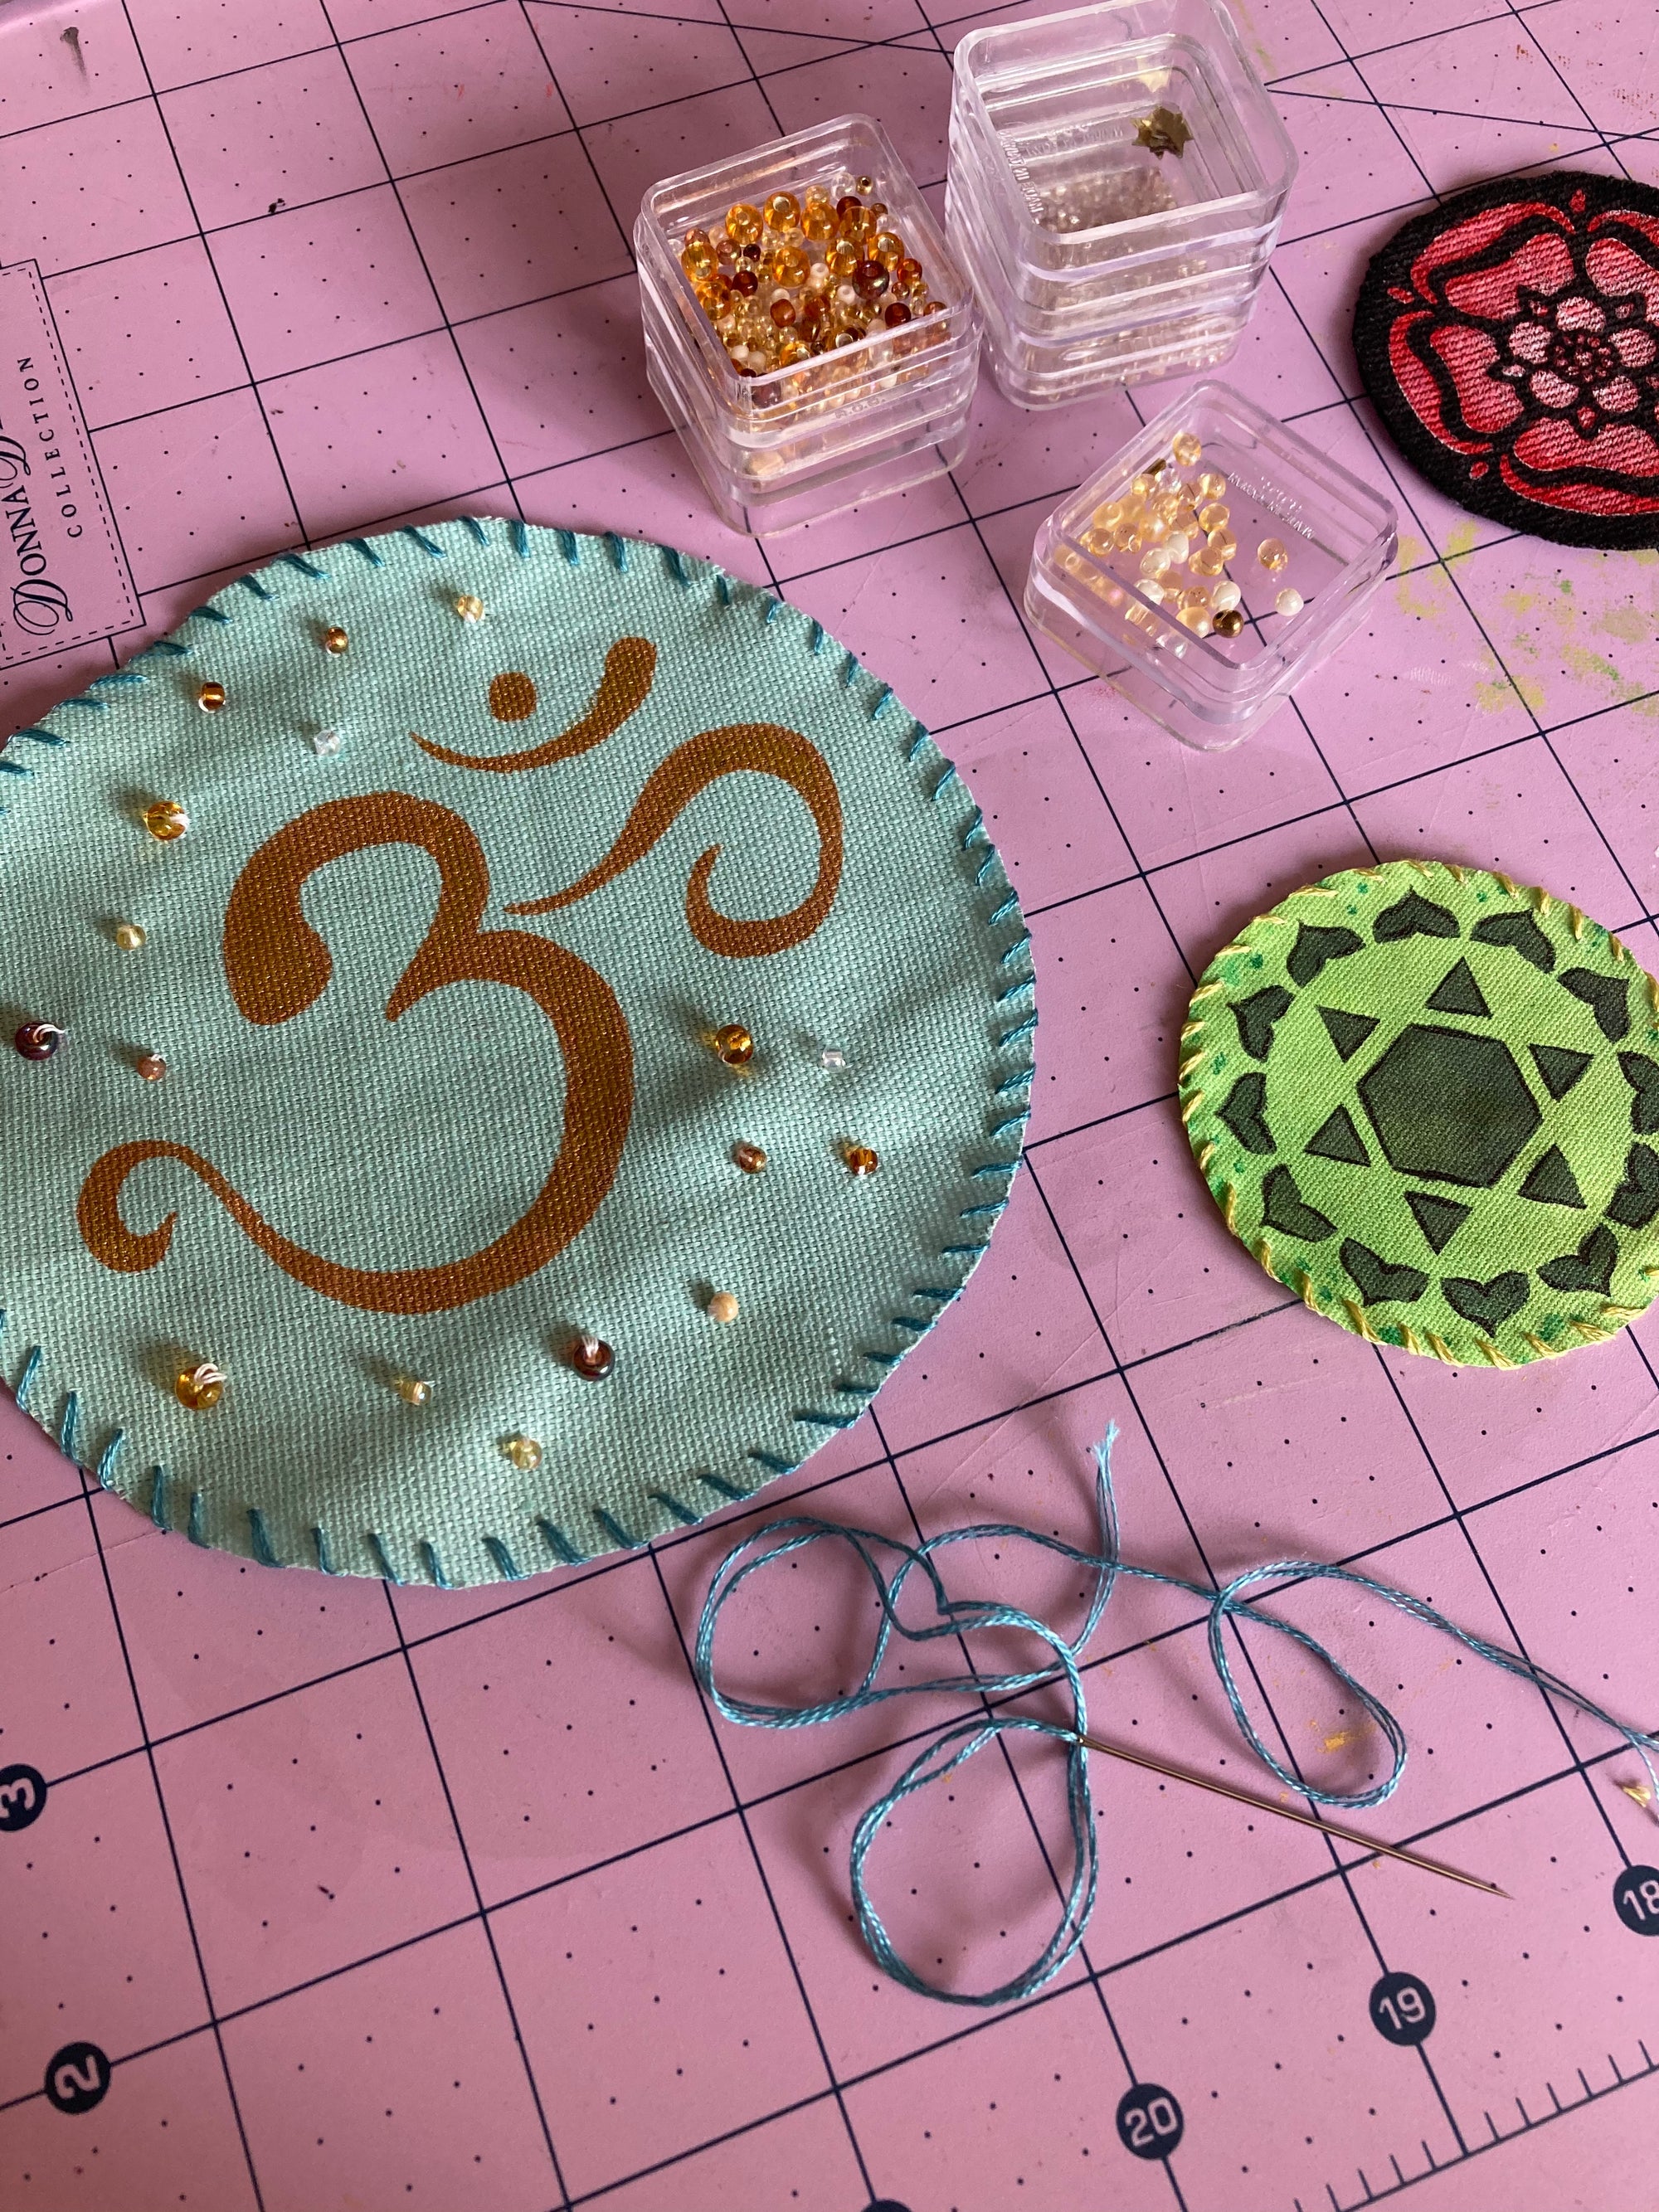 Making fabric patches